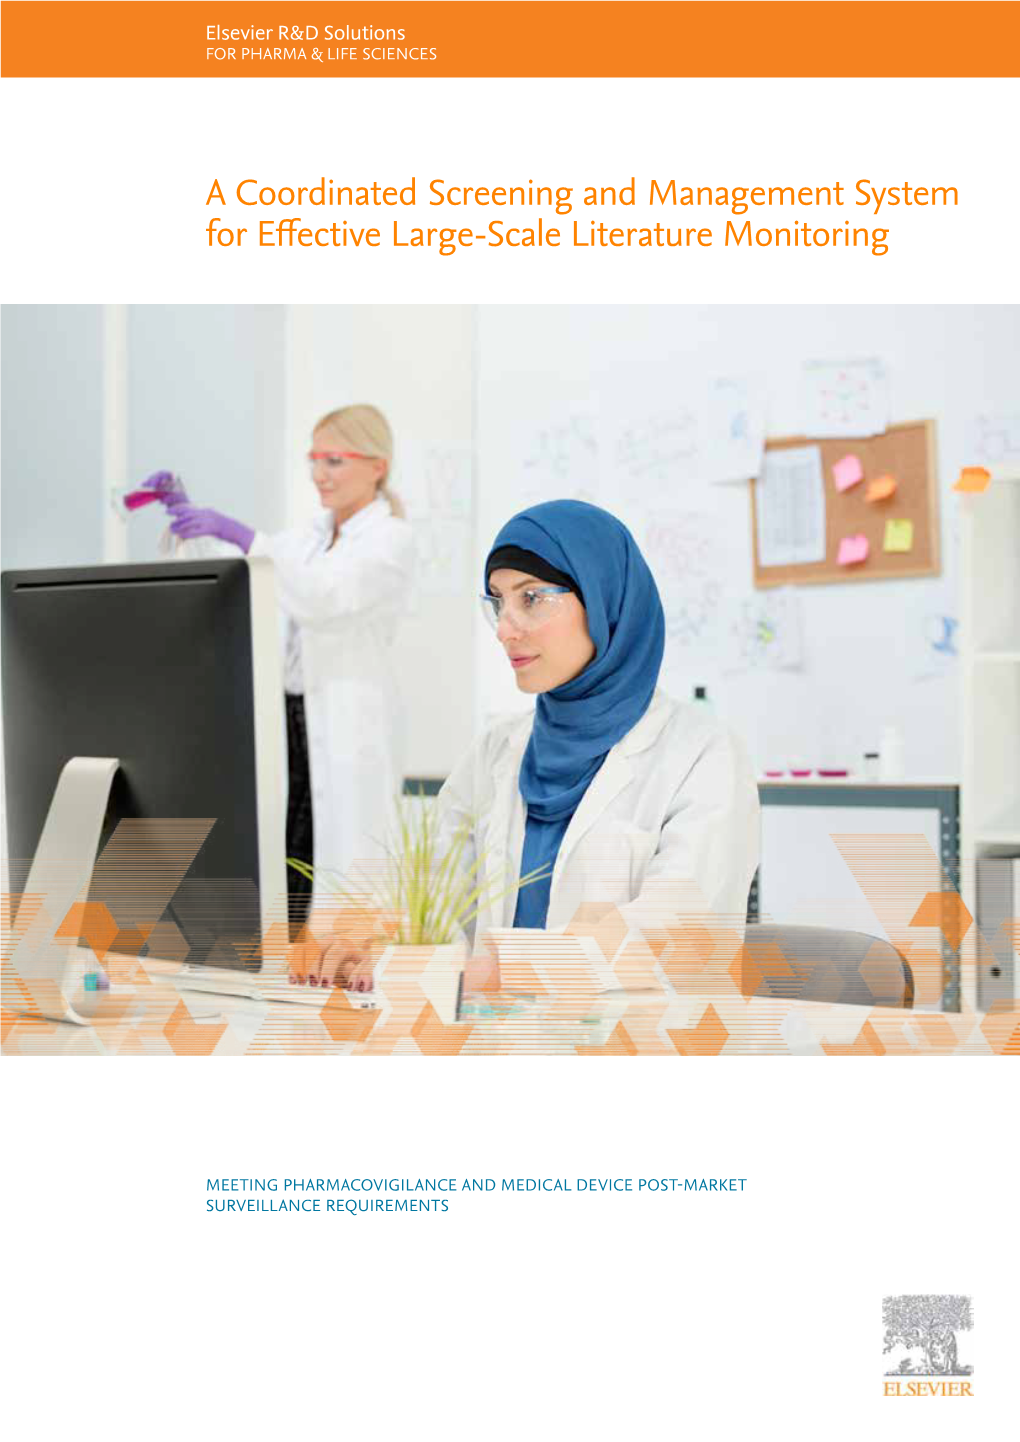 A Coordinated Screening and Management System for Effective Large-Scale Literature Monitoring